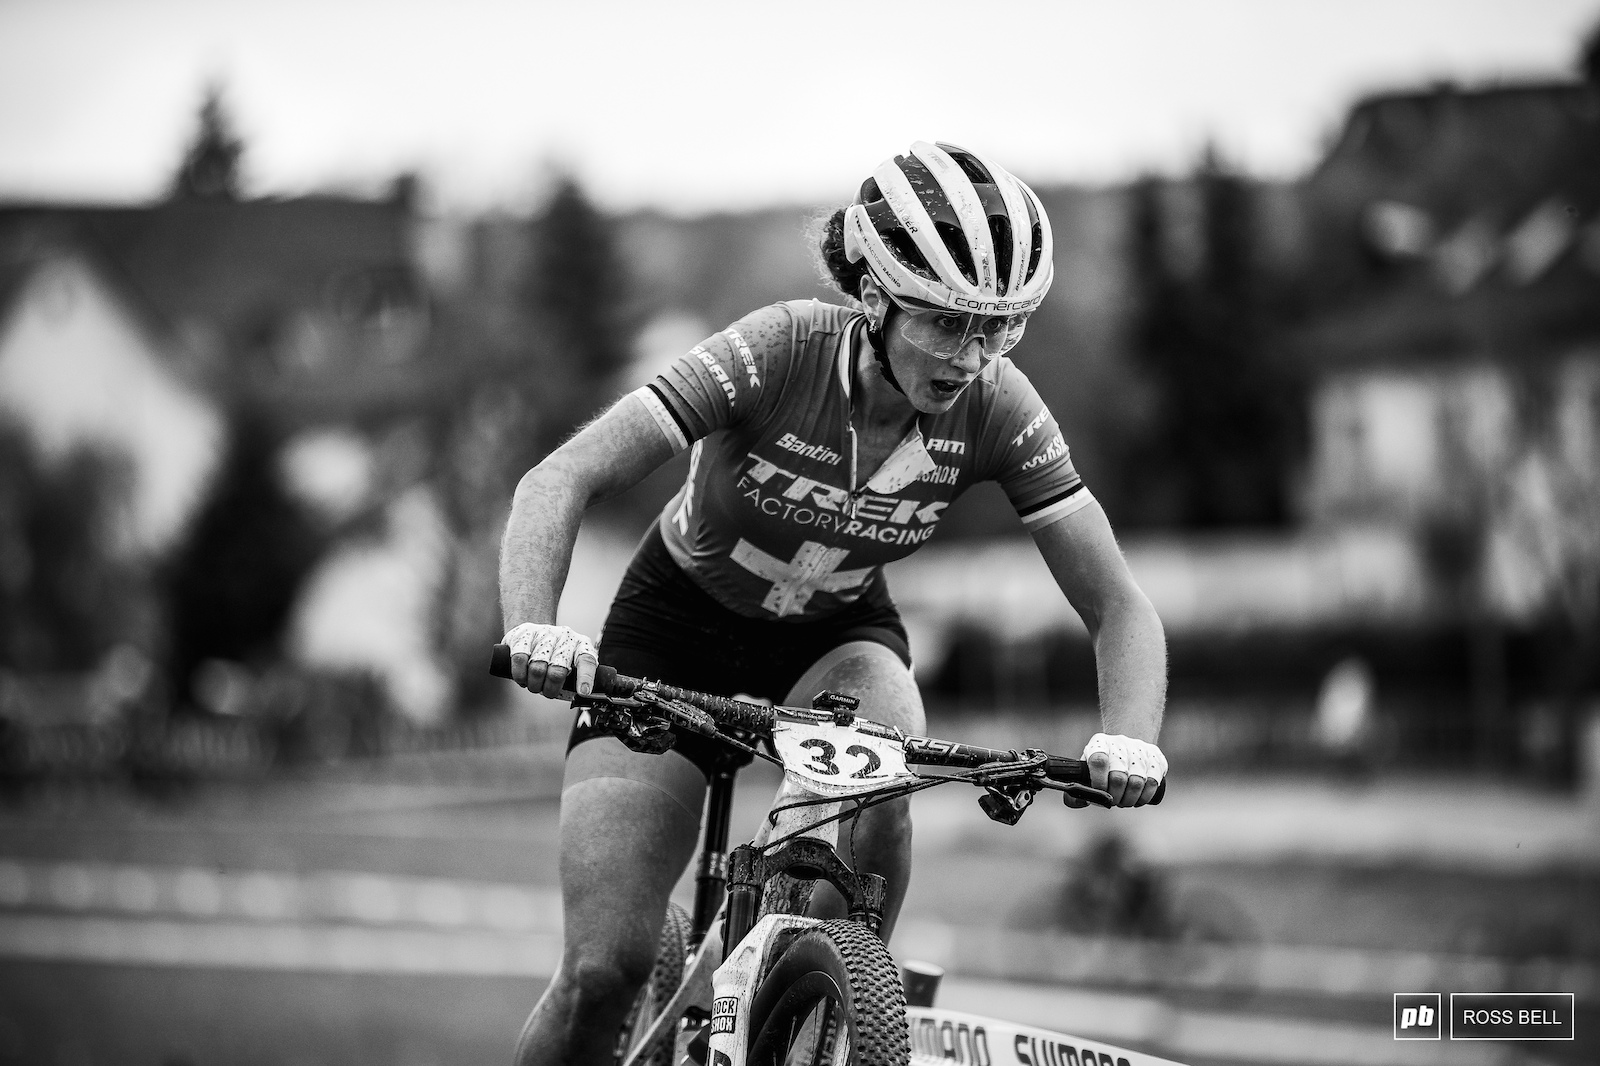 Jolanda Neff took charge at the front early in the race before slipping back to 9th.